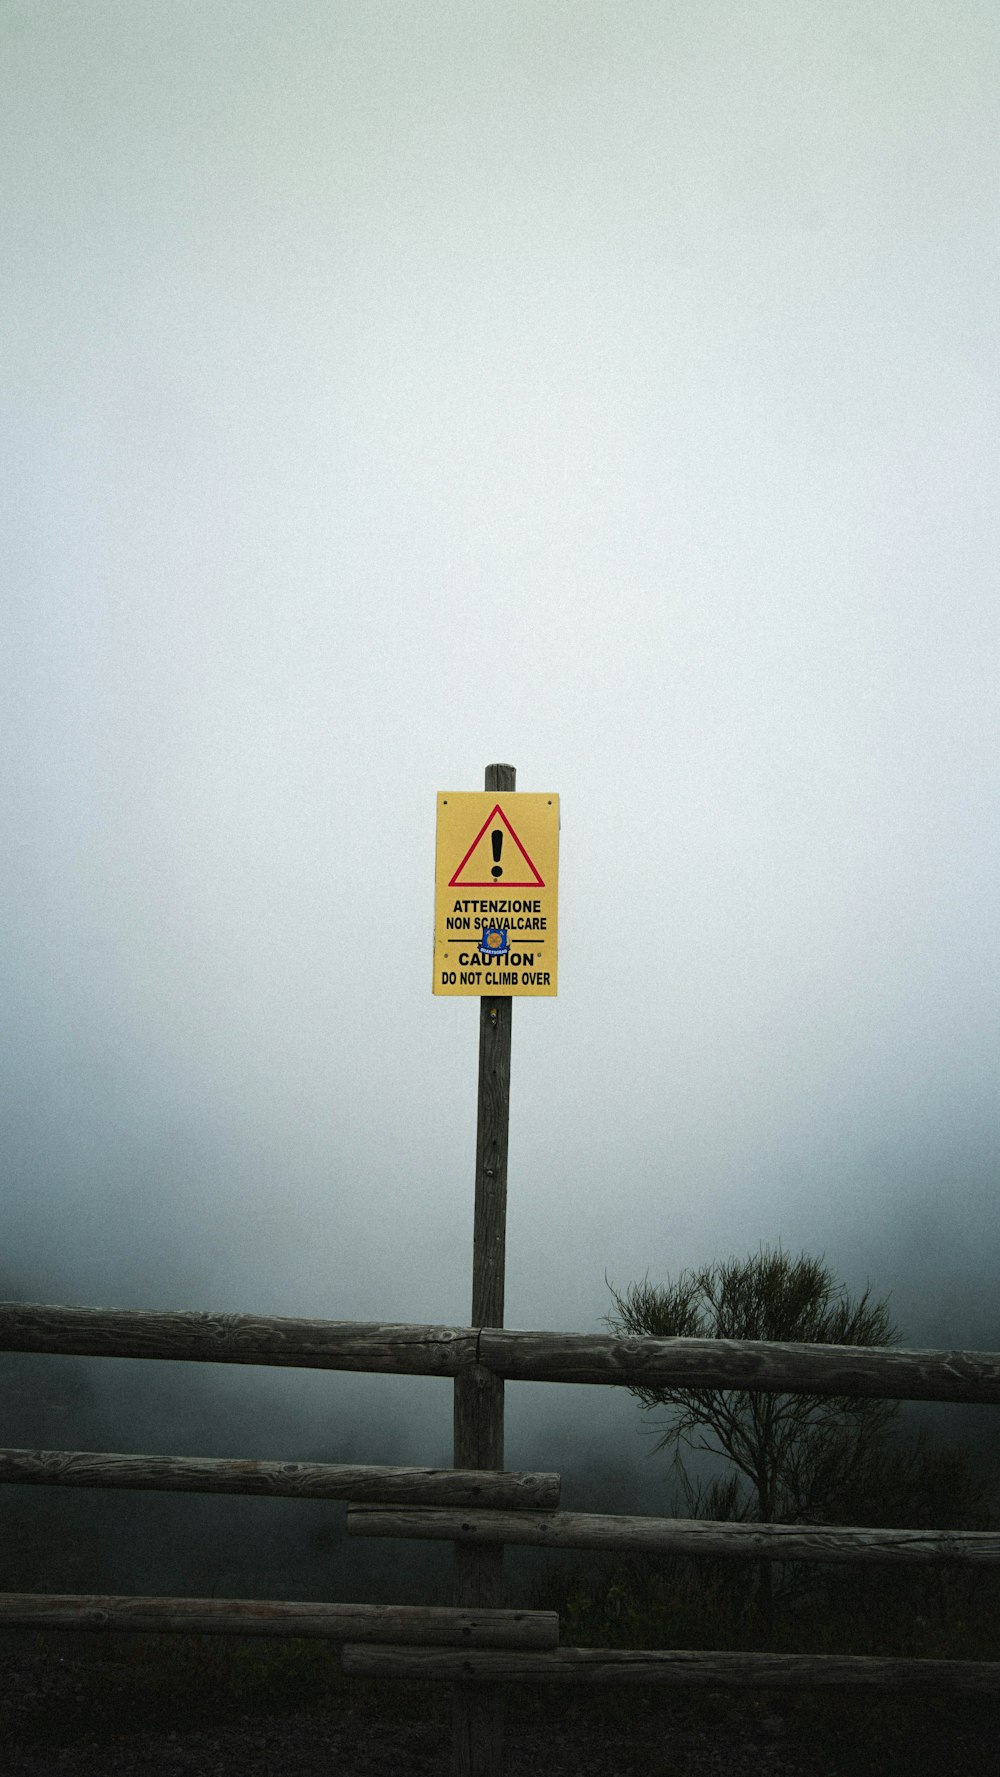 a warning sign on a wooden fence on a foggy day